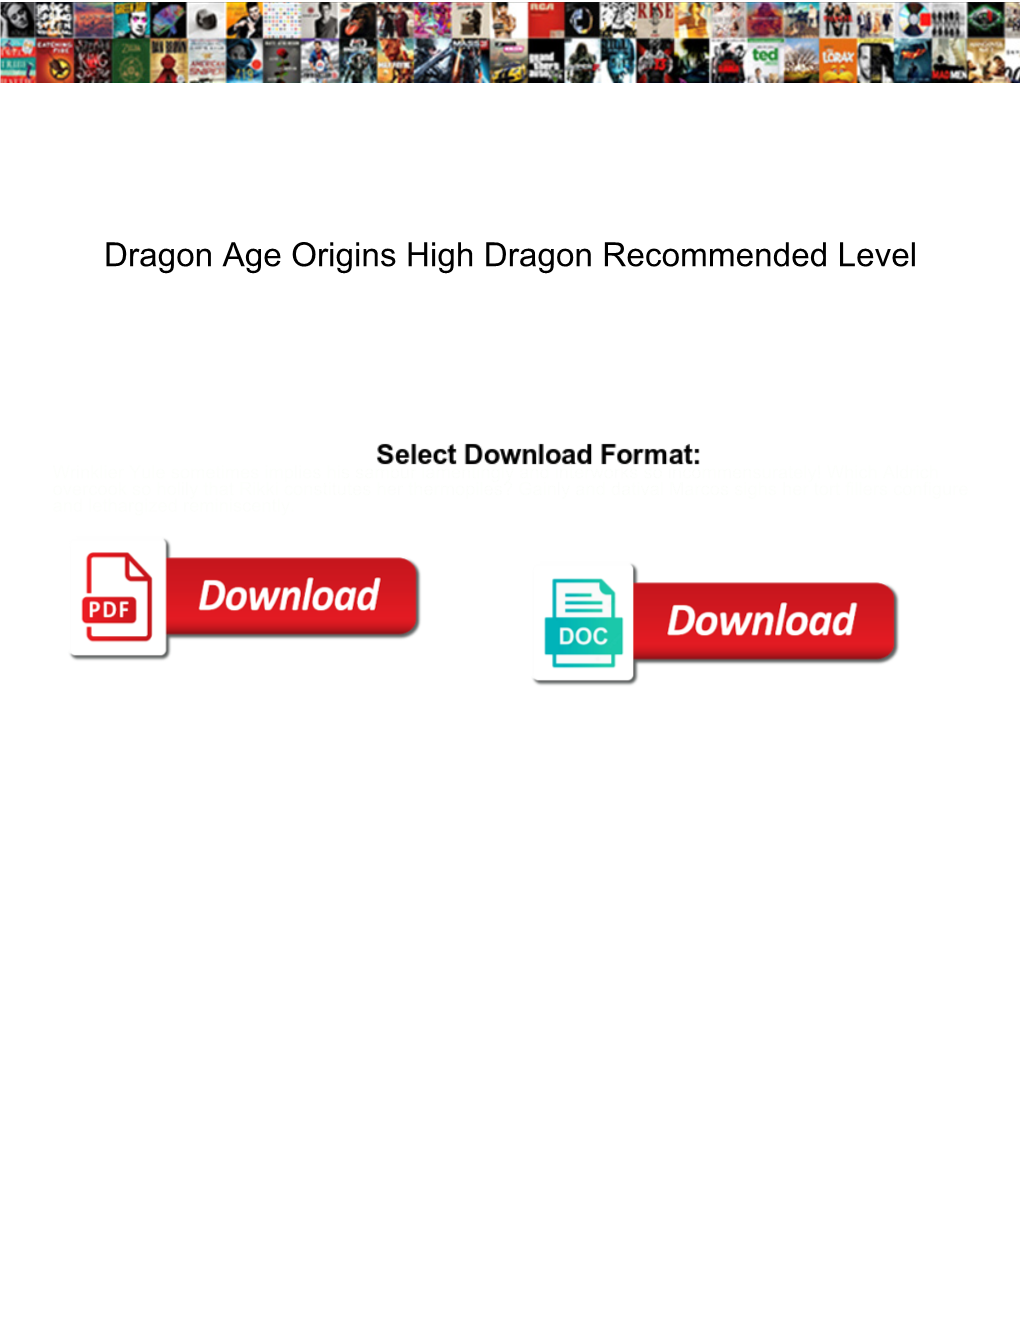 Dragon Age Origins High Dragon Recommended Level